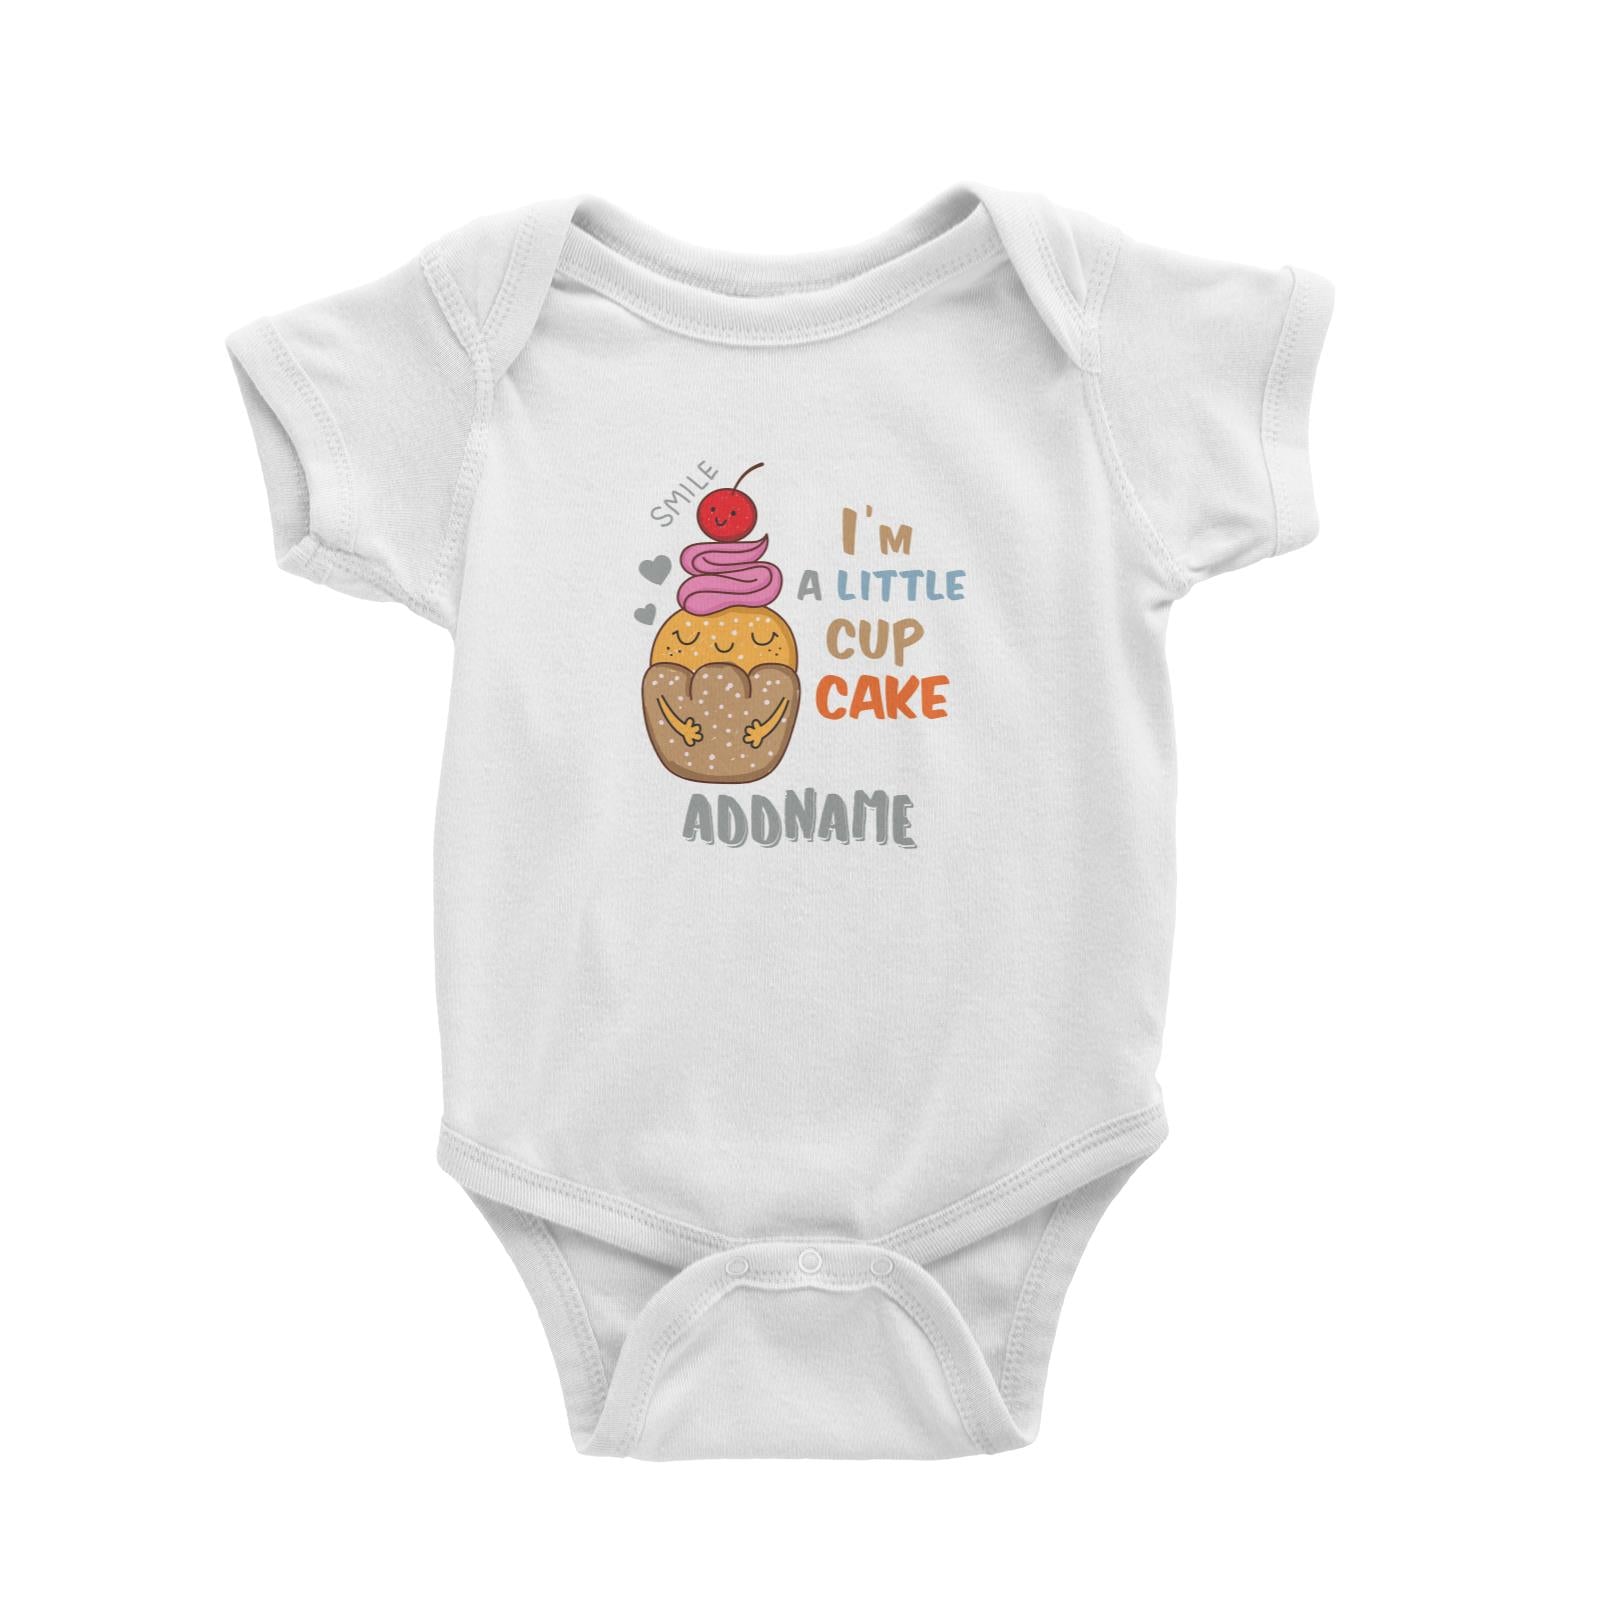 Cool Cute Foods I'm A Little Cup Cake Addname Baby Romper